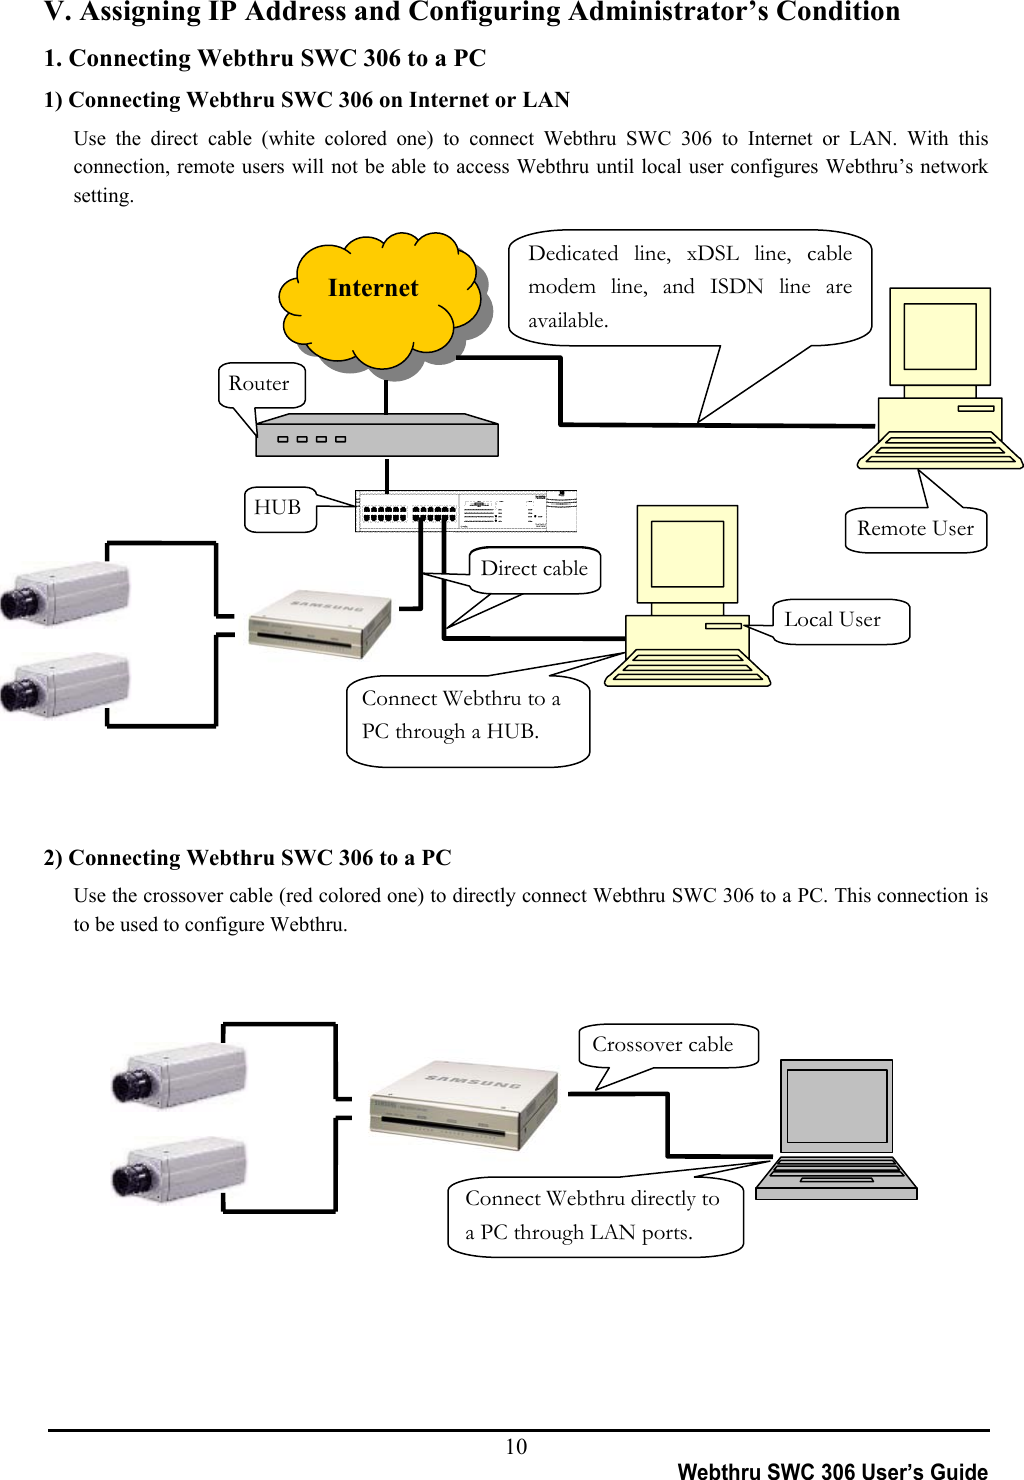 10Webthru SWC 306 User’s GuideV. Assigning IP Address and Configuring Administrator’s Condition1. Connecting Webthru SWC 306 to a PC1) Connecting Webthru SWC 306 on Internet or LANUse the direct cable (white colored one) to connect Webthru SWC 306 to Internet or LAN. With thisconnection, remote users will not be able to access Webthru until local user configures Webthru’s networksetting.2) Connecting Webthru SWC 306 to a PCUse the crossover cable (red colored one) to directly connect Webthru SWC 306 to a PC. This connection isto be used to configure Webthru.Connect Webthru to aPC through a HUB.HUBDirect cableInternetLocal UserRemote UserRouterDedicated line, xDSL line, cablemodem line, and ISDN line areavailable.Crossover cableConnect Webthru directly toa PC through LAN ports.